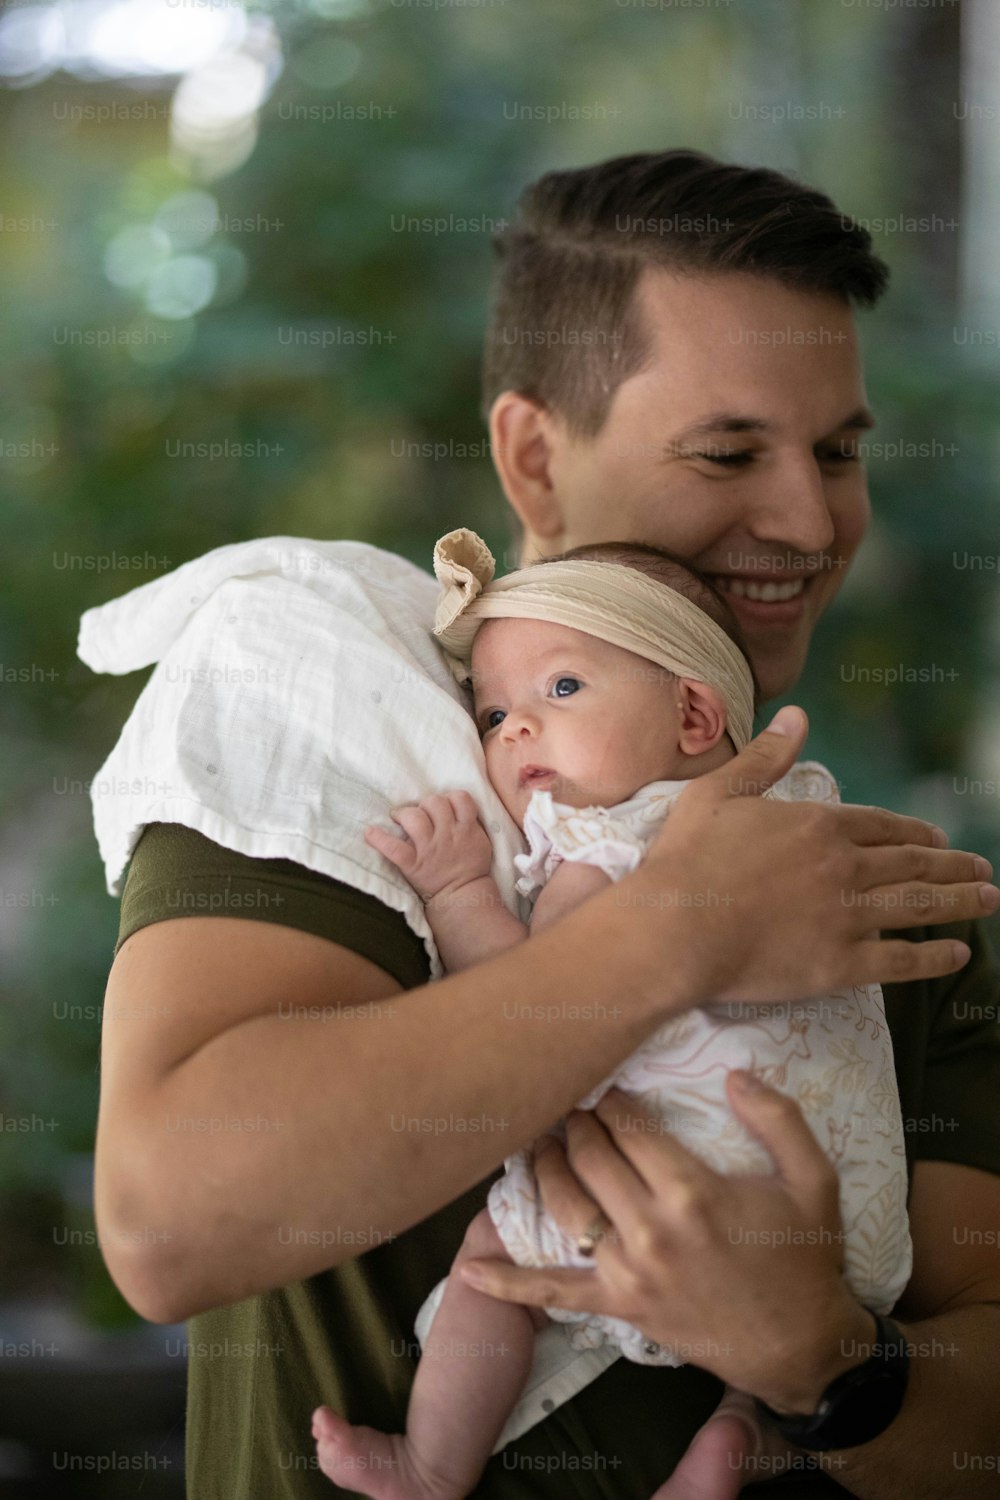 a man holding a baby in his arms